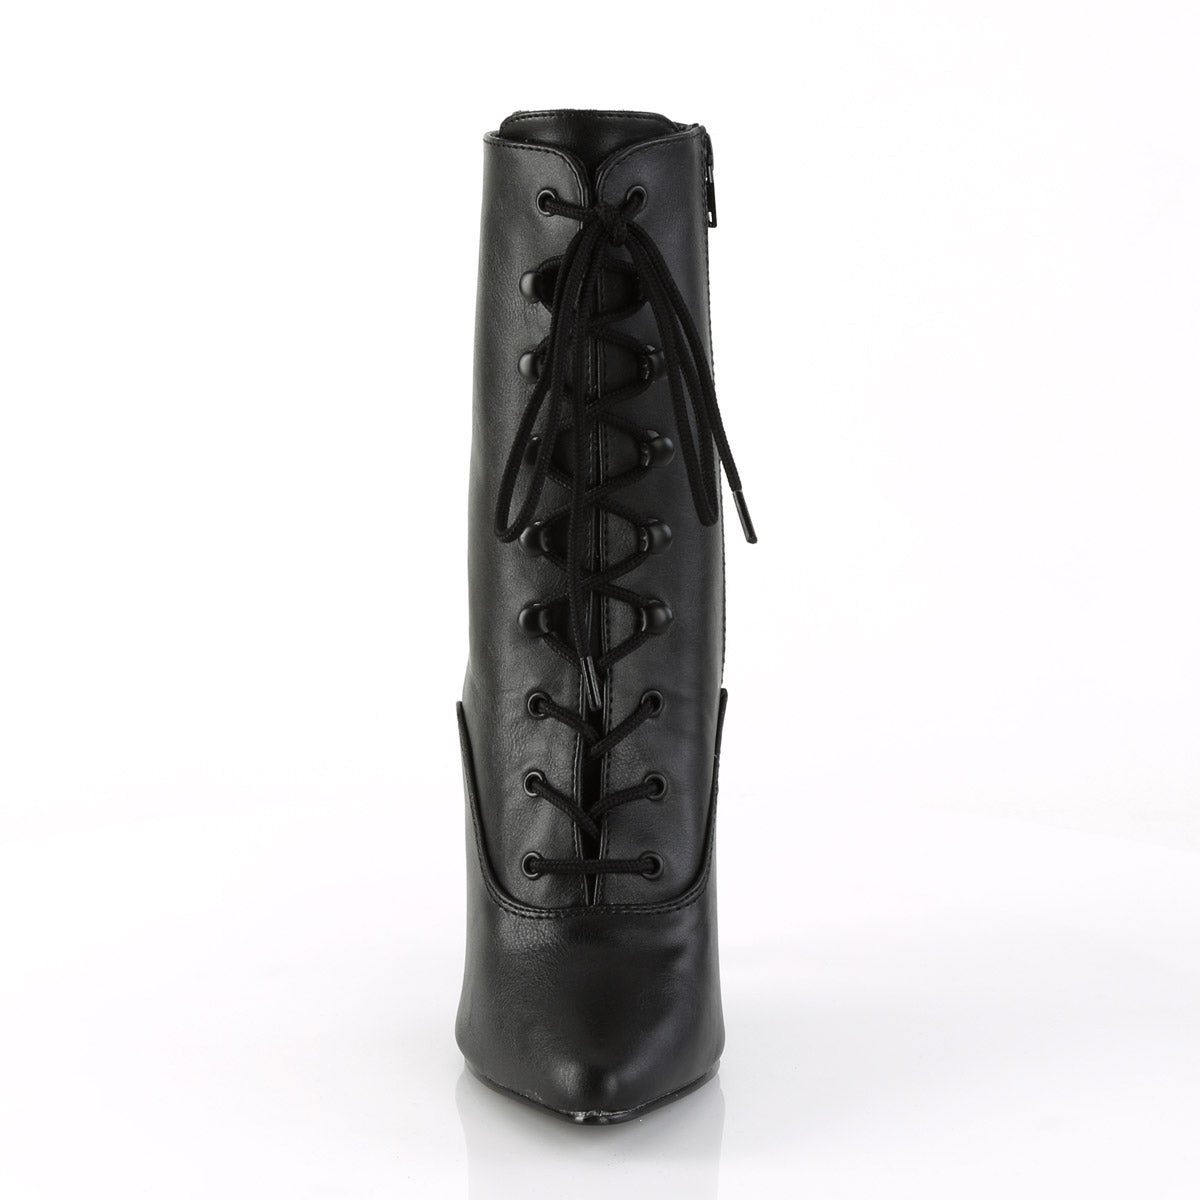 Sexy Pointy Toe Lace Up Ankle Bootie Stiletto High Heel Boots Shoes Pleaser Pleaser SEDUCE/1020